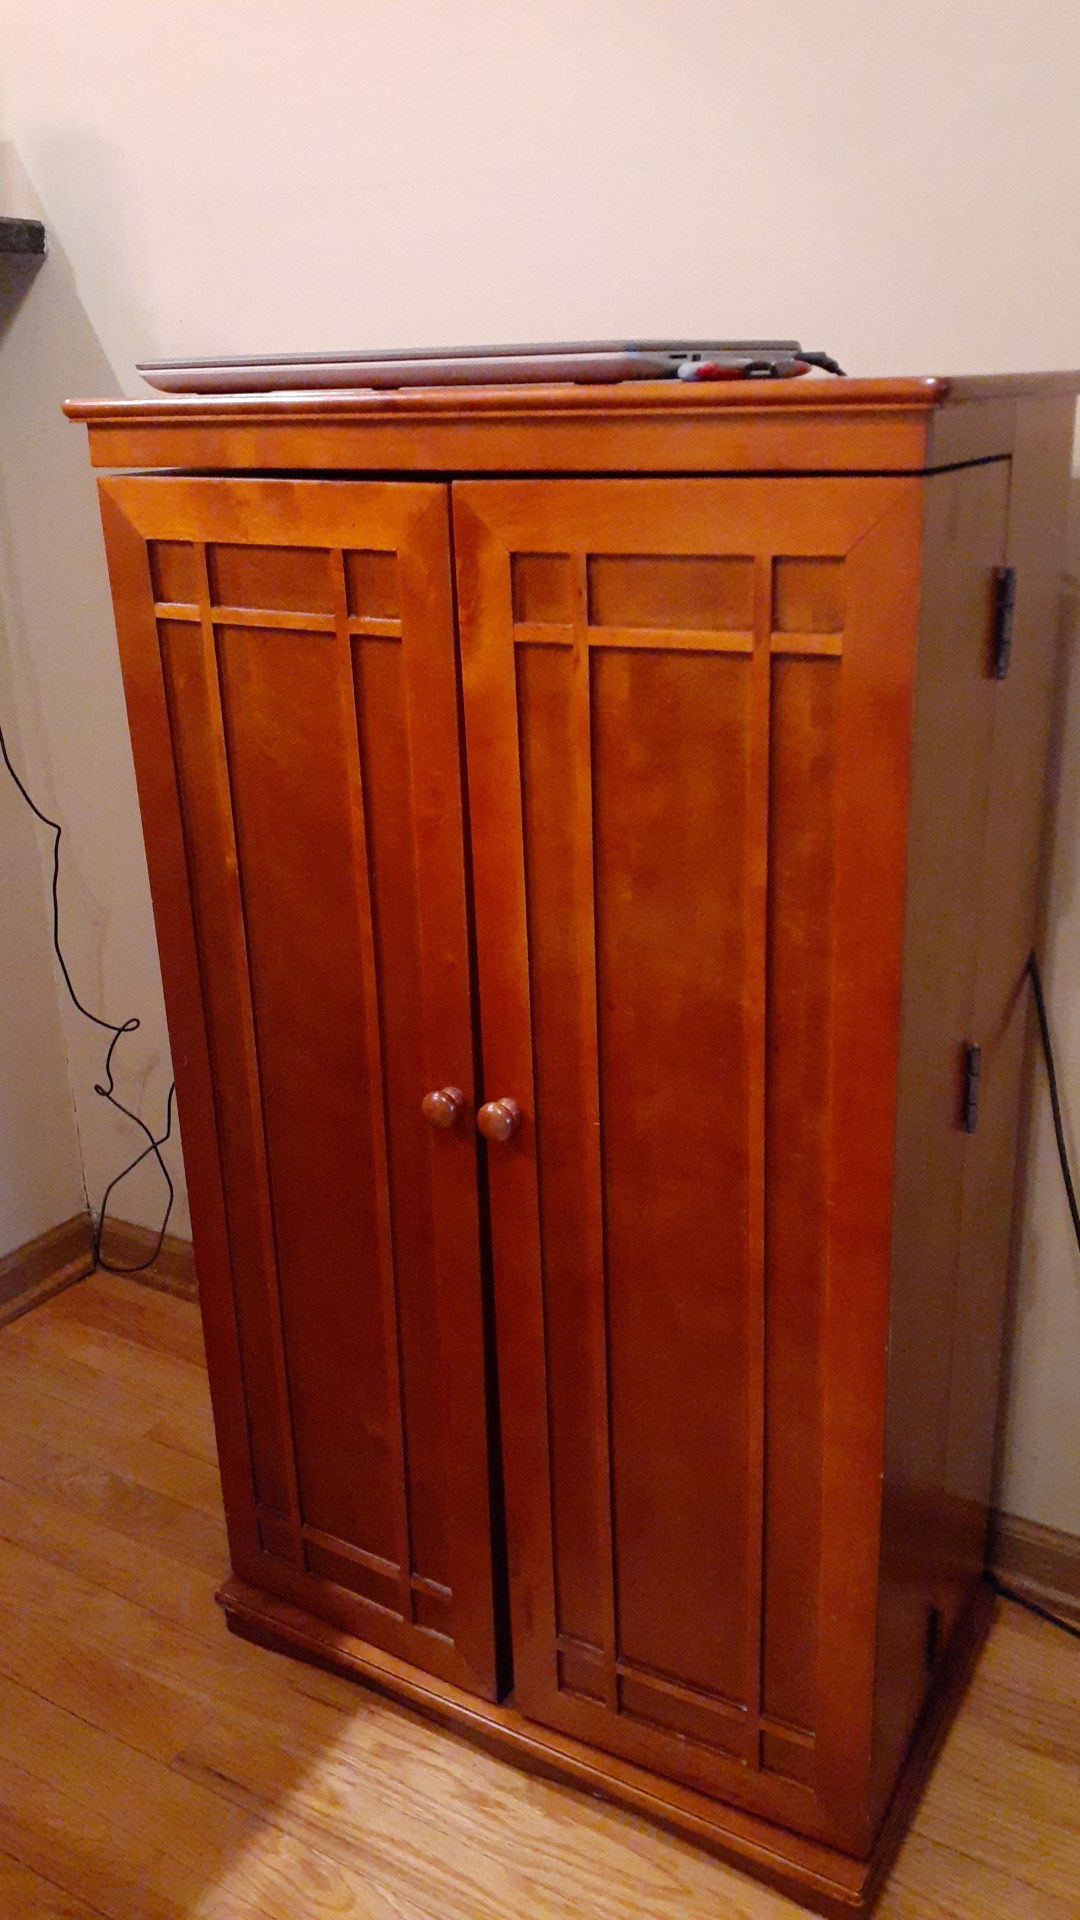 Perfect media storage cabinet with lot of storage. Cherry color.